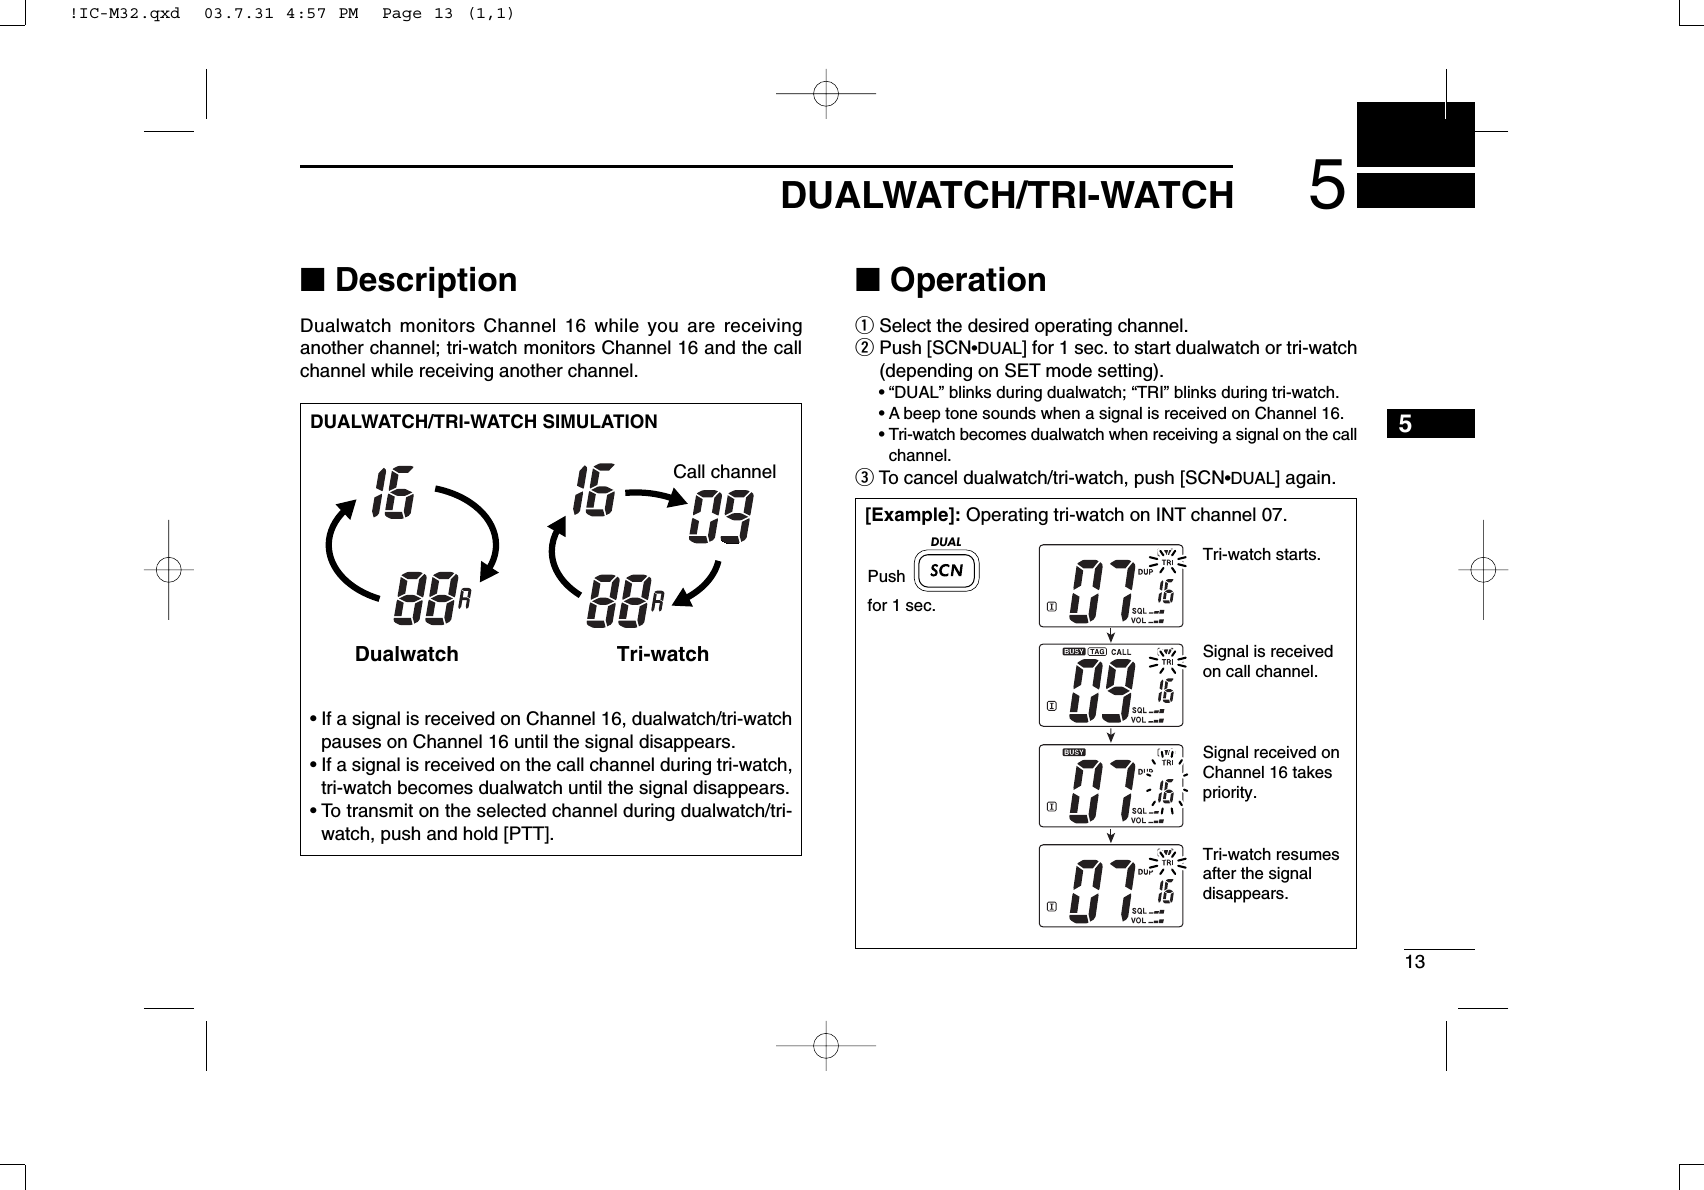 135DUALWATCH/TRI-WATCH5■DescriptionDualwatch monitors Channel 16 while you are receiving another channel; tri-watch monitors Channel 16 and the callchannel while receiving another channel.■OperationqSelect the desired operating channel.wPush [SCN•DUAL] for 1 sec. to start dualwatch or tri-watch(depending on SET mode setting).•“DUAL” blinks during dualwatch; “TRI” blinks during tri-watch.•A beep tone sounds when a signal is received on Channel 16.•Tri-watch becomes dualwatch when receiving a signal on the callchannel.eTo cancel dualwatch/tri-watch, push [SCN•DUAL] again.DUALWATCH/TRI-WATCH SIMULATION•If a signal is received on Channel 16, dualwatch/tri-watchpauses on Channel 16 until the signal disappears.•If a signal is received on the call channel during tri-watch,tri-watch becomes dualwatch until the signal disappears.•To transmit on the selected channel during dualwatch/tri-watch, push and hold [PTT].Dualwatch Tri-watchCall channel[Example]: Operating tri-watch on INT channel 07.Tri-watch starts.Pushfor 1 sec.Signal is received on call channel.Signal received on Channel 16 takes priority.Tri-watch resumes after the signal disappears.DUAL!IC-M32.qxd  03.7.31 4:57 PM  Page 13 (1,1)